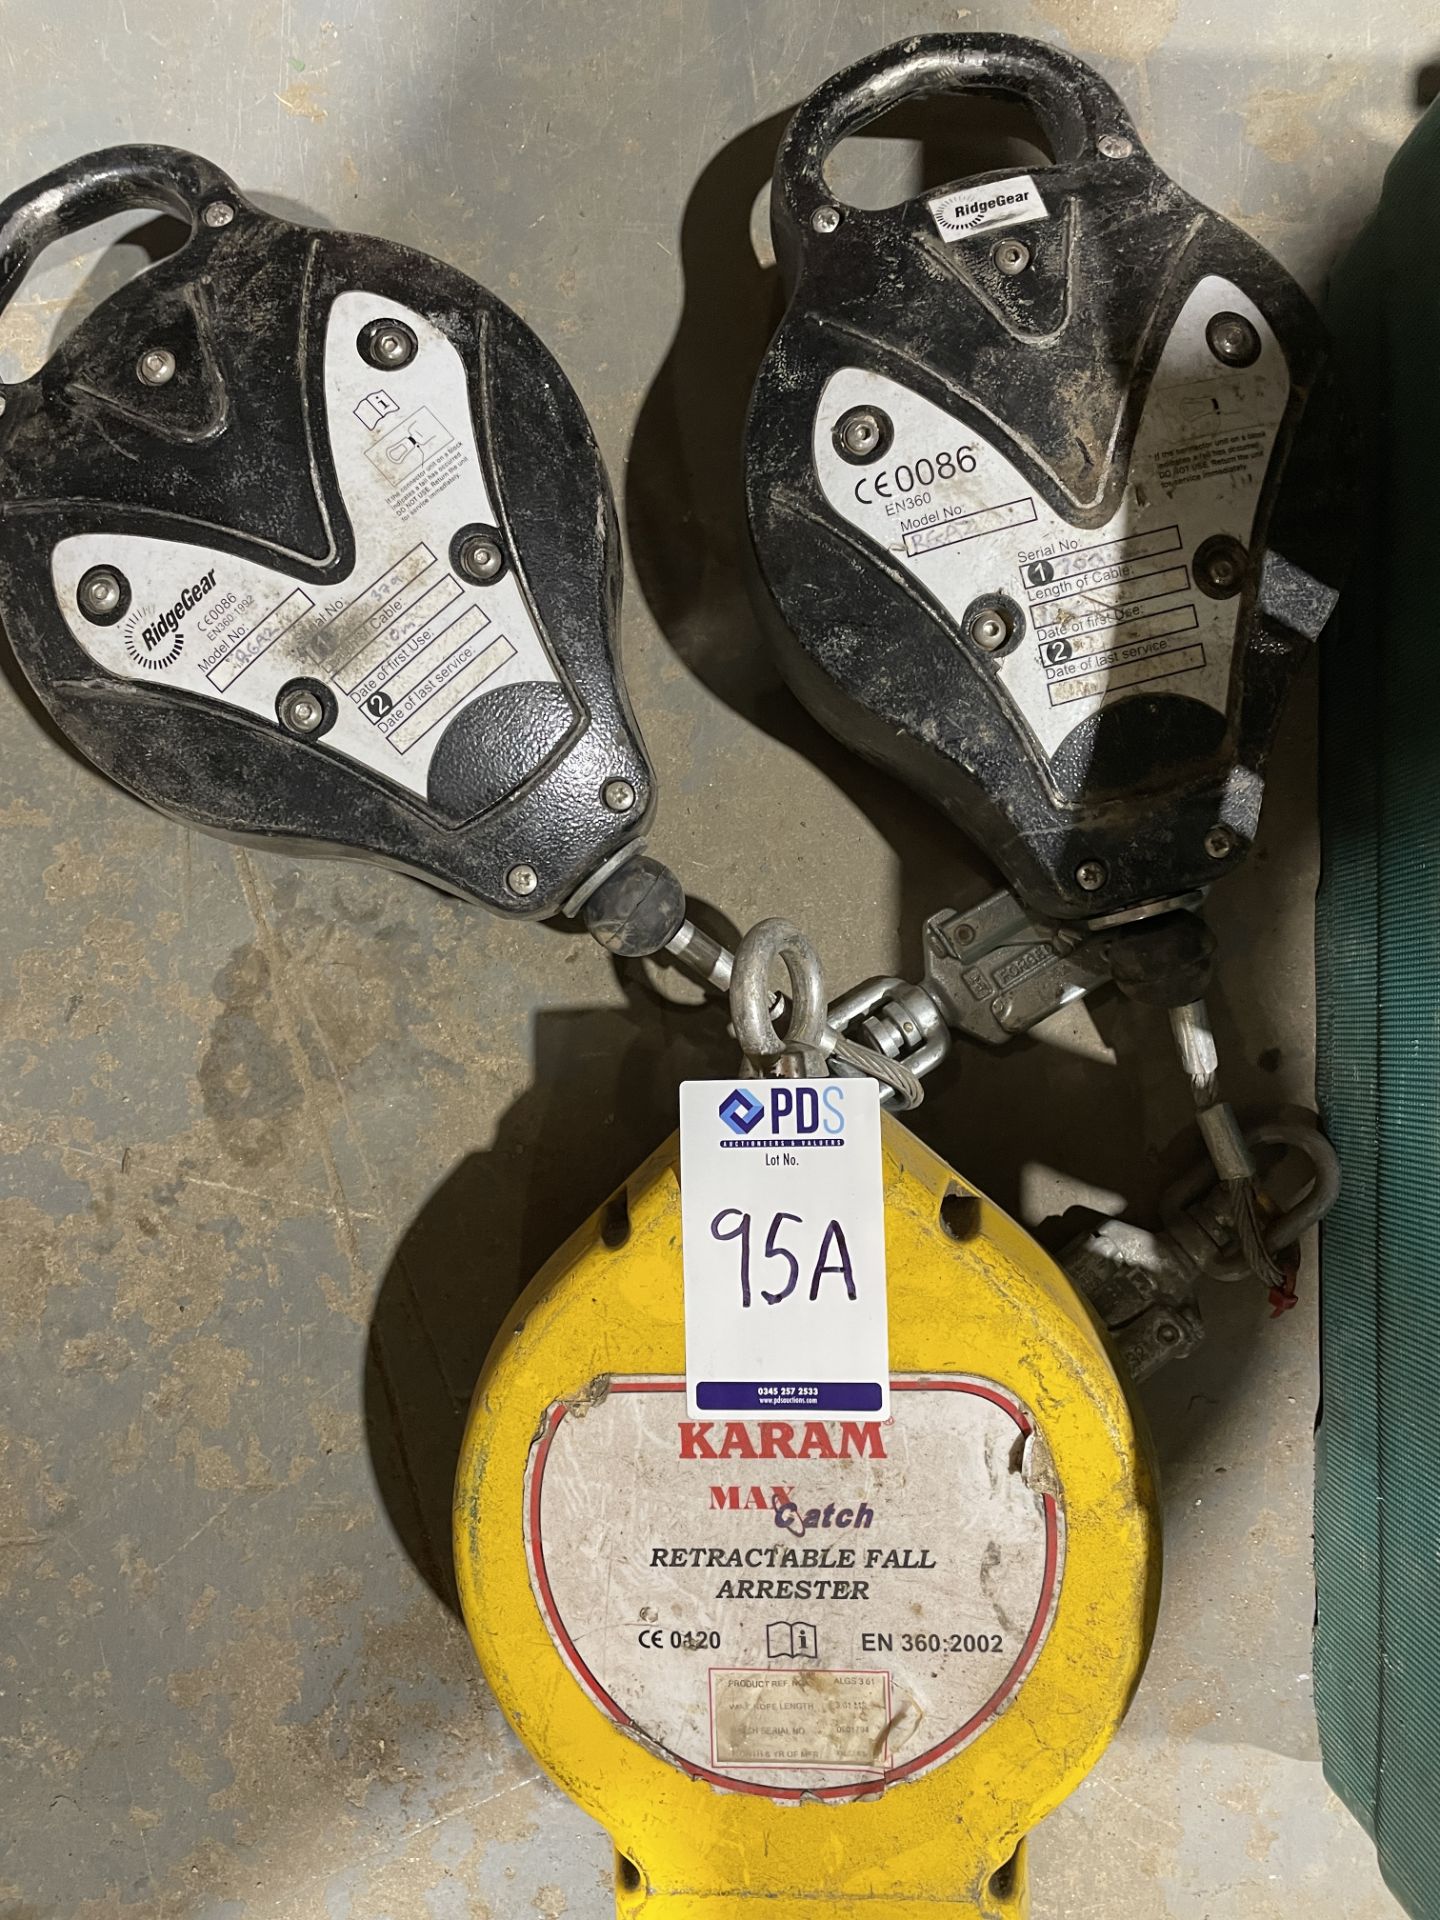 Two Ridgegear Fall Arrestors with Harnesses, Lanyards etc (Location Rochester. Please Refer to